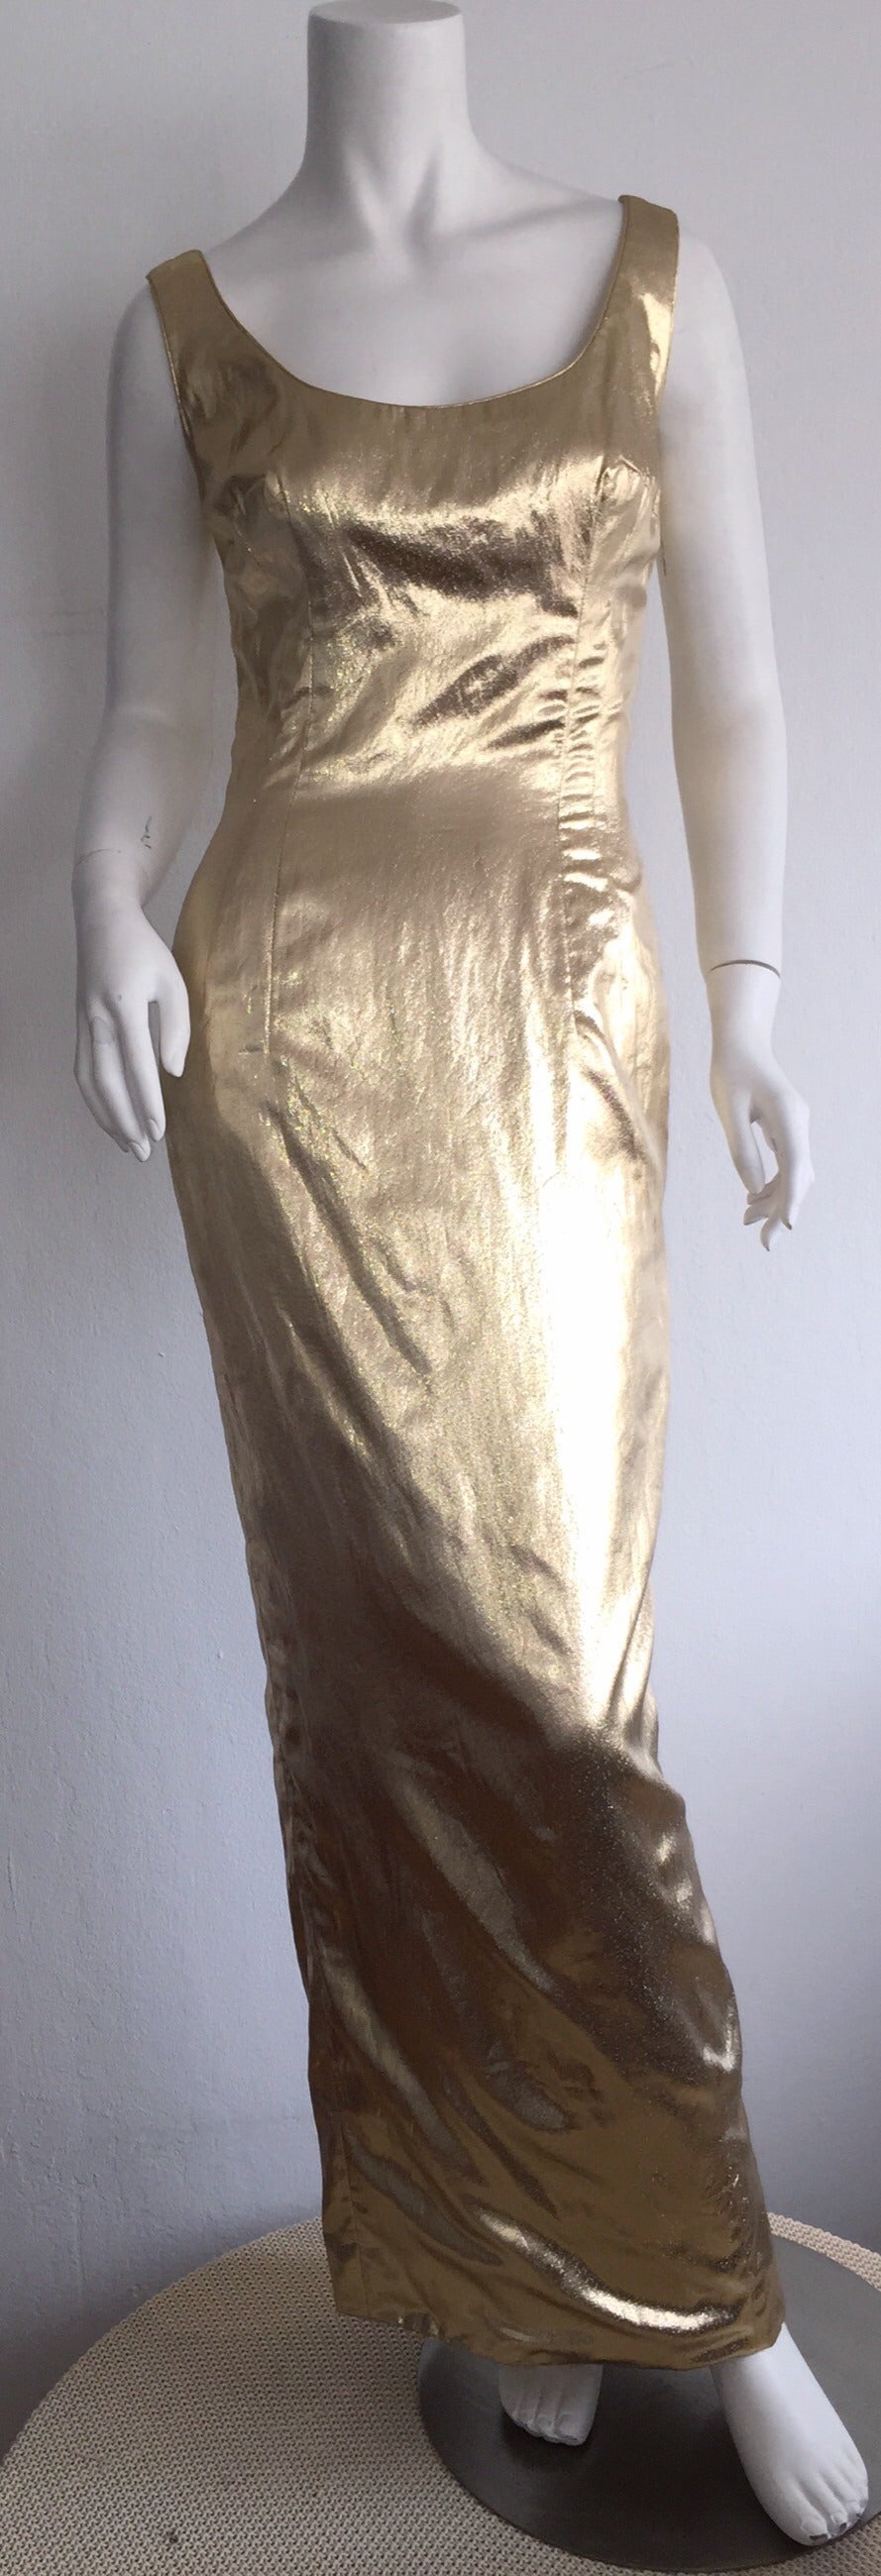 Bombshell 1950s Mr Blackwell 50s Vintage Couture Gold Metallic Wiggle Dress Gown In Excellent Condition For Sale In San Diego, CA